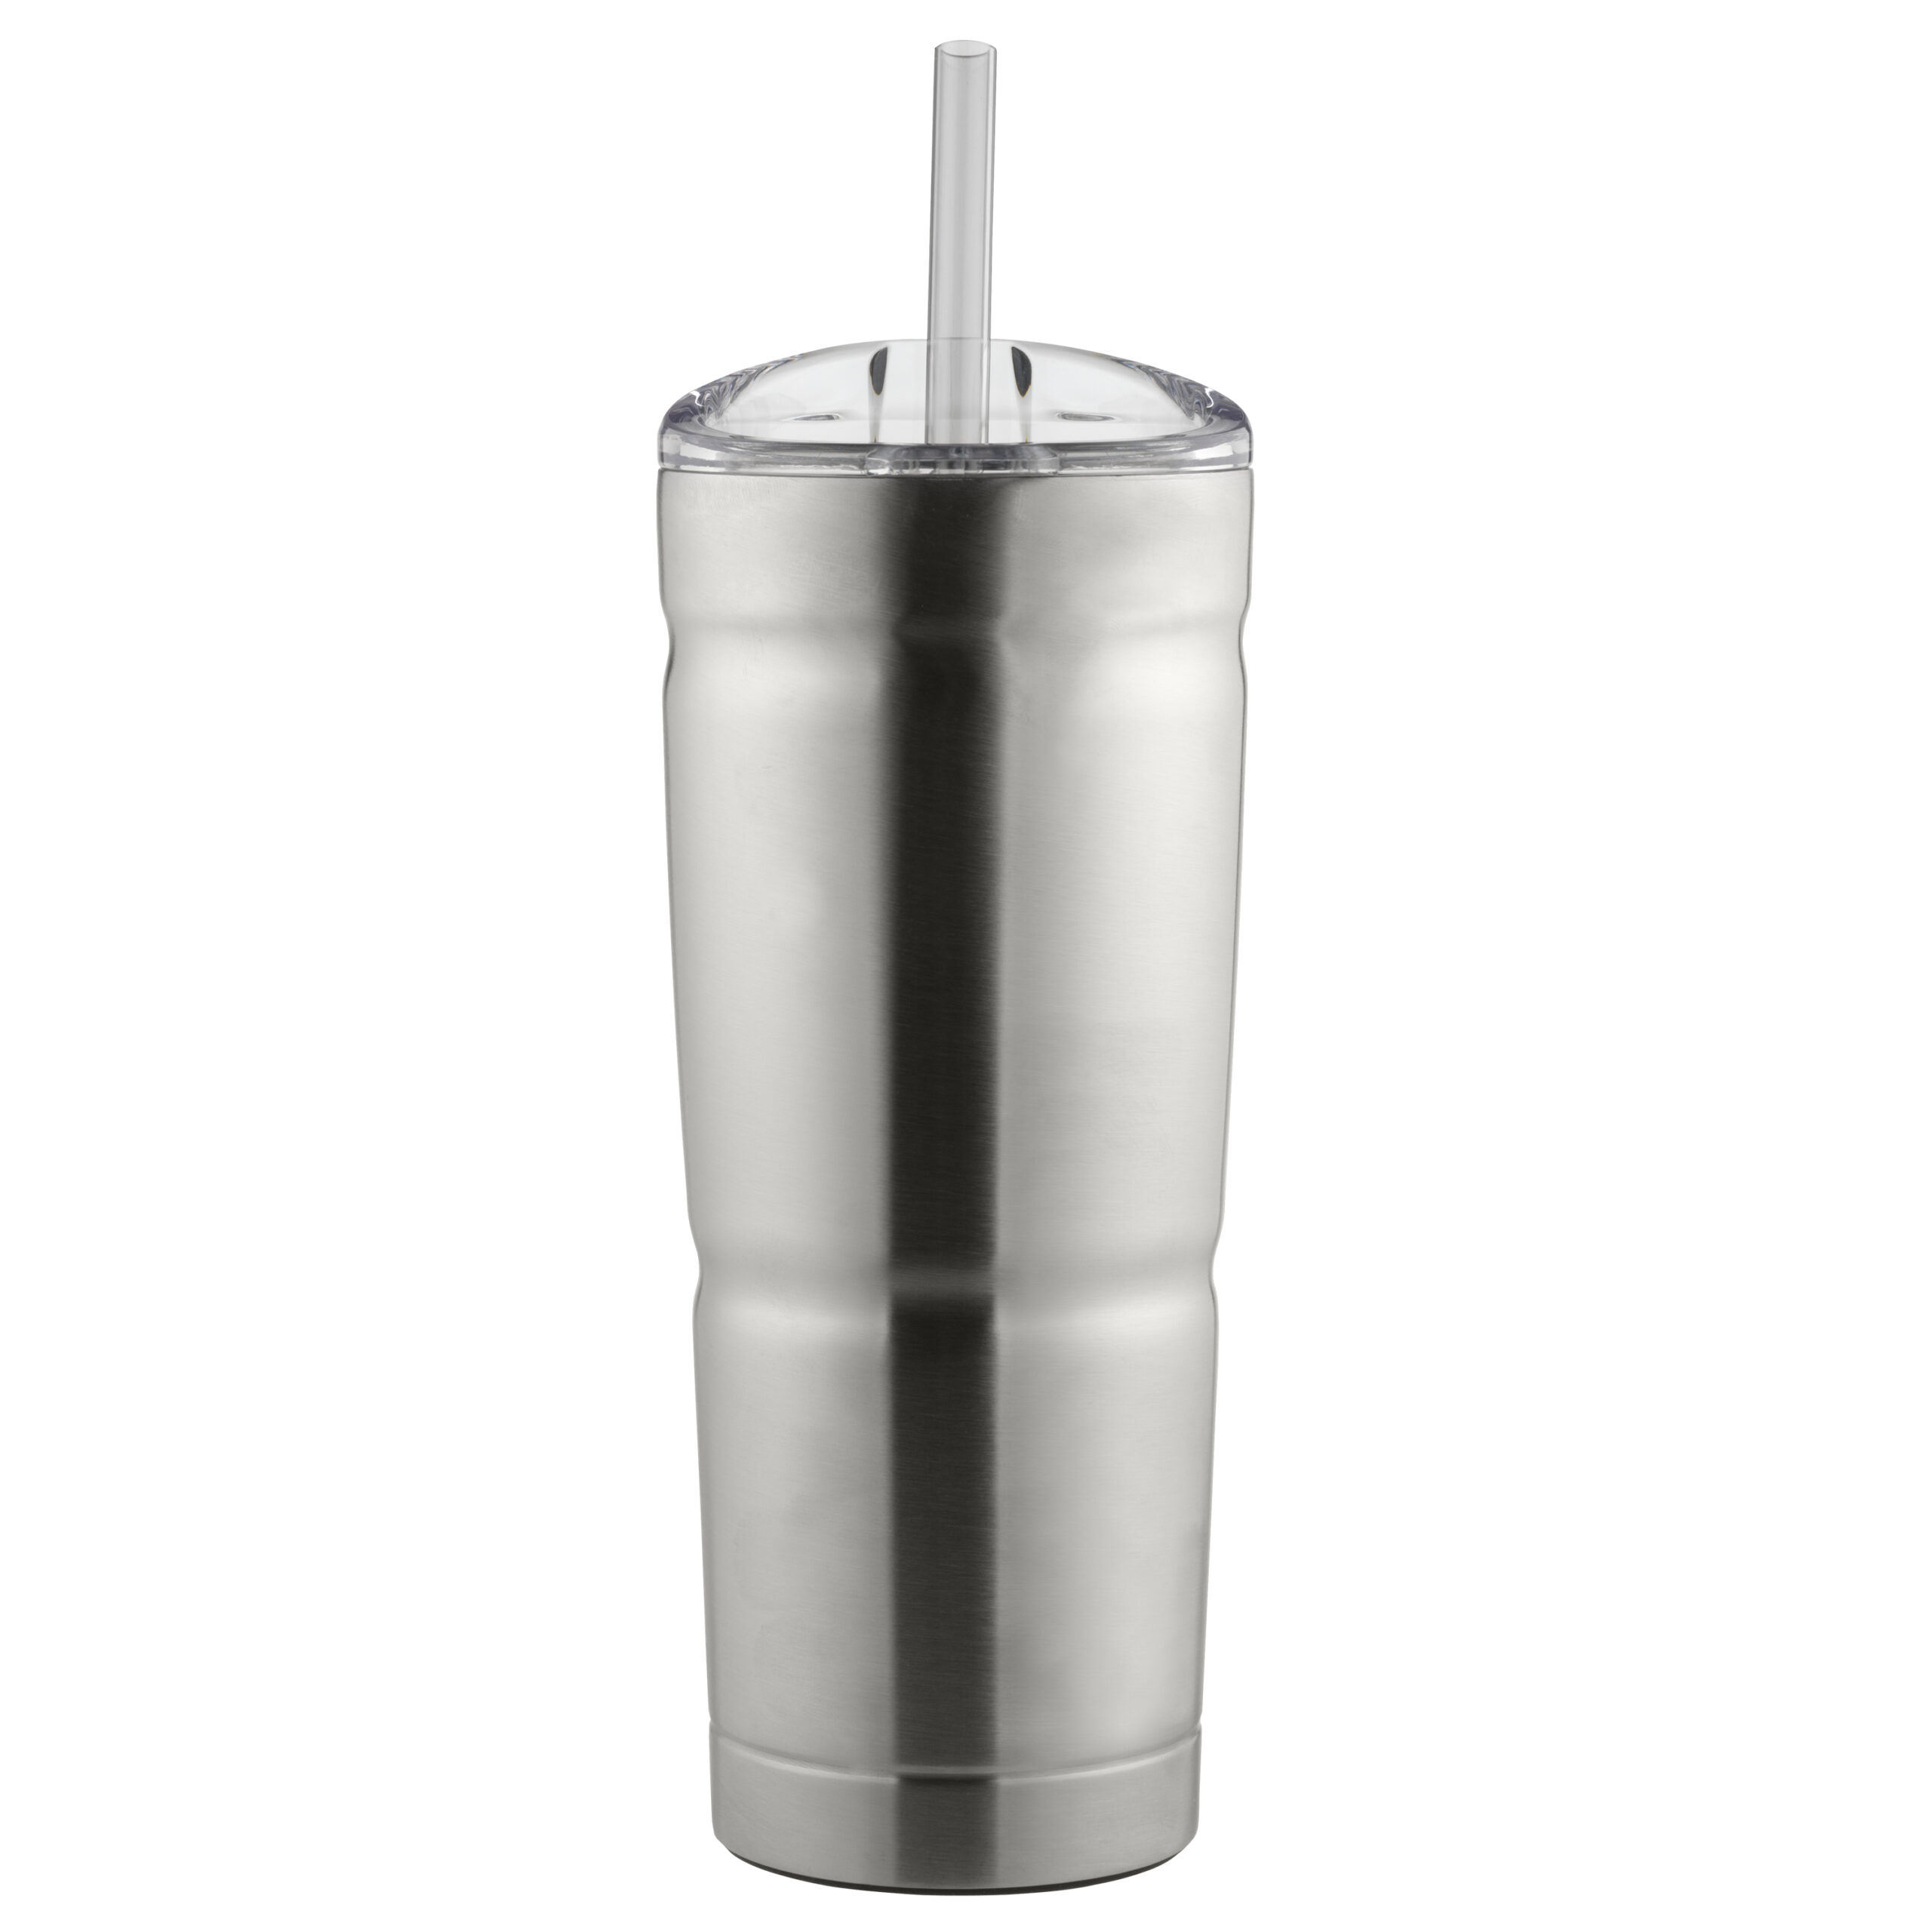 24 Oz Envy Insulated Stainless Steel Tumbler with Straw